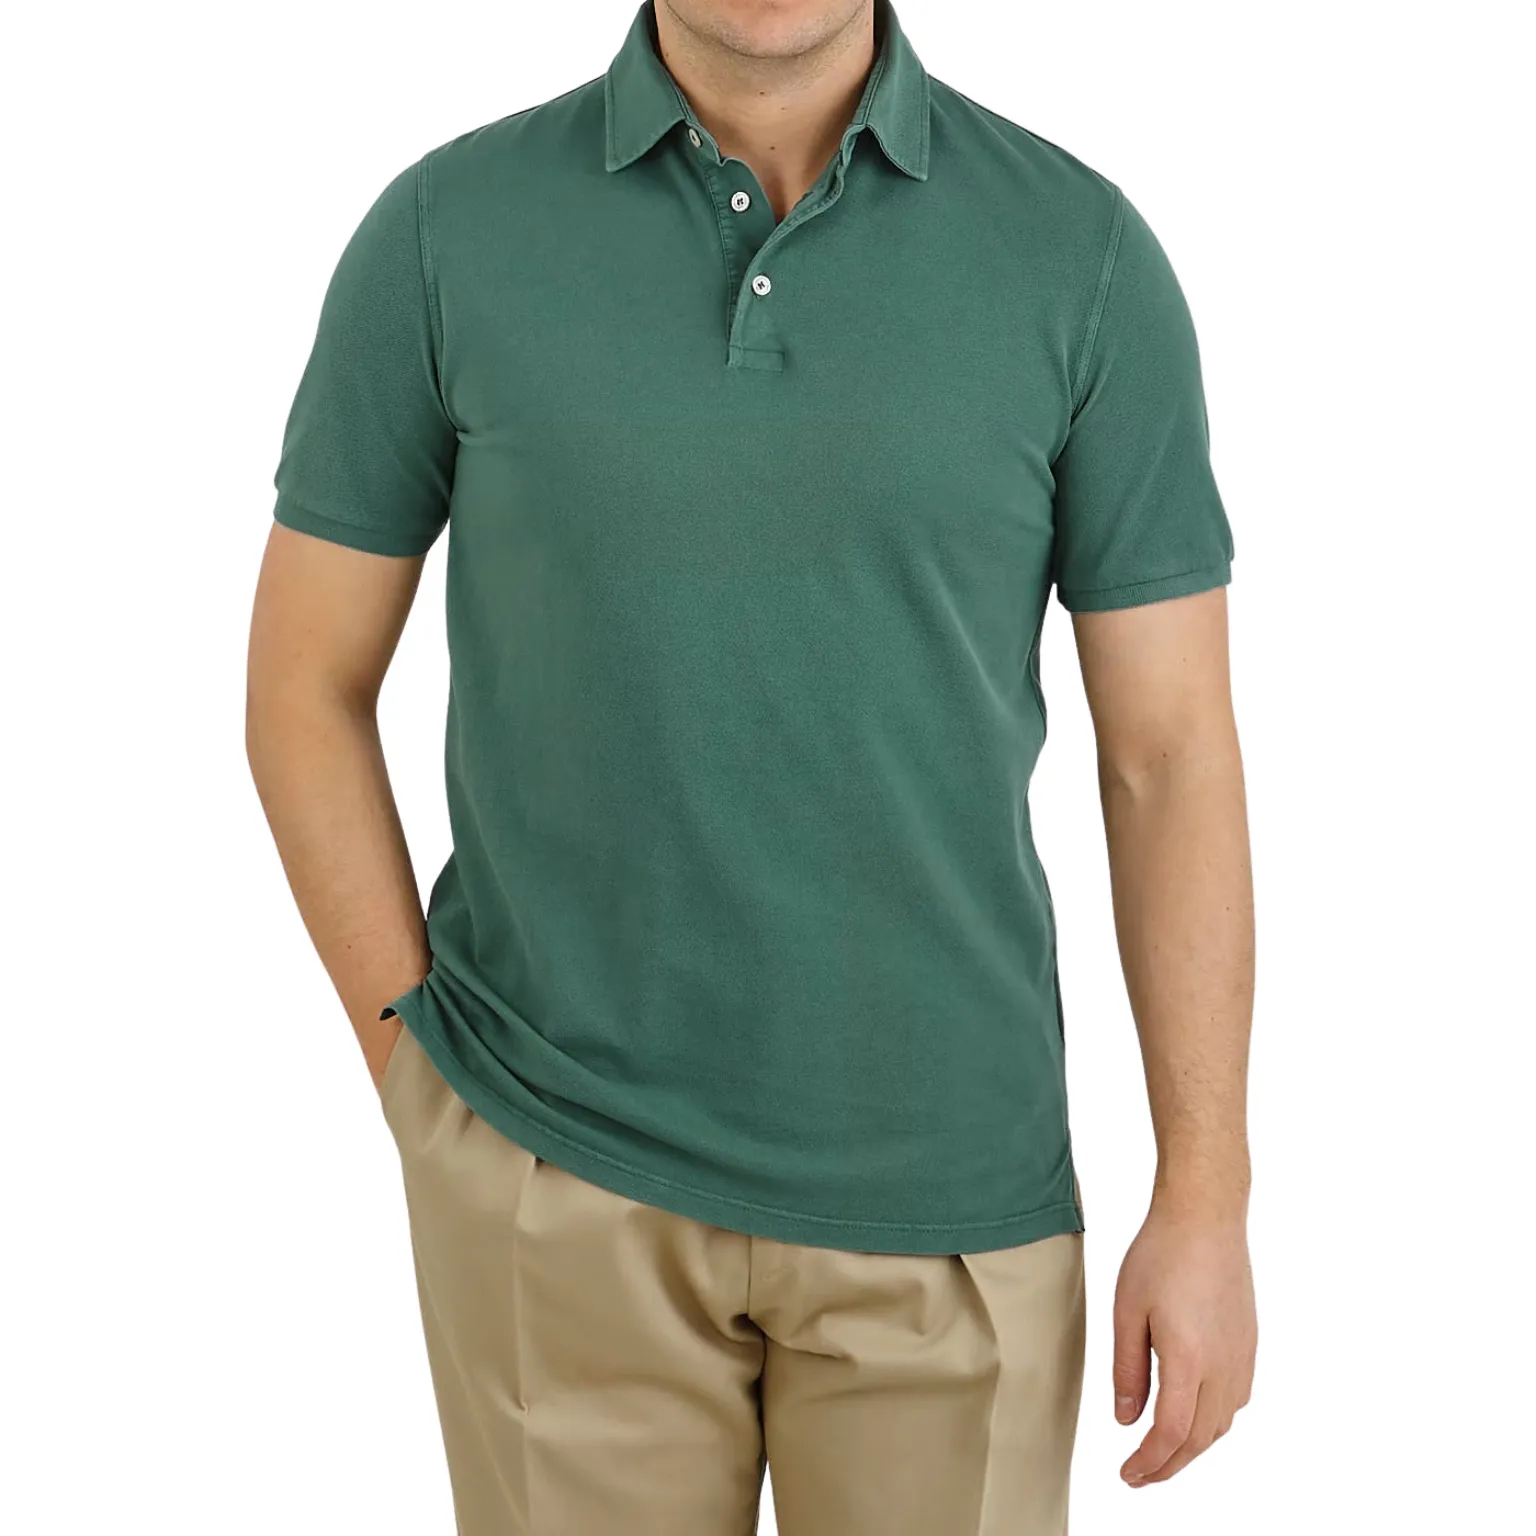 Pique Polo Shirts with trendy design